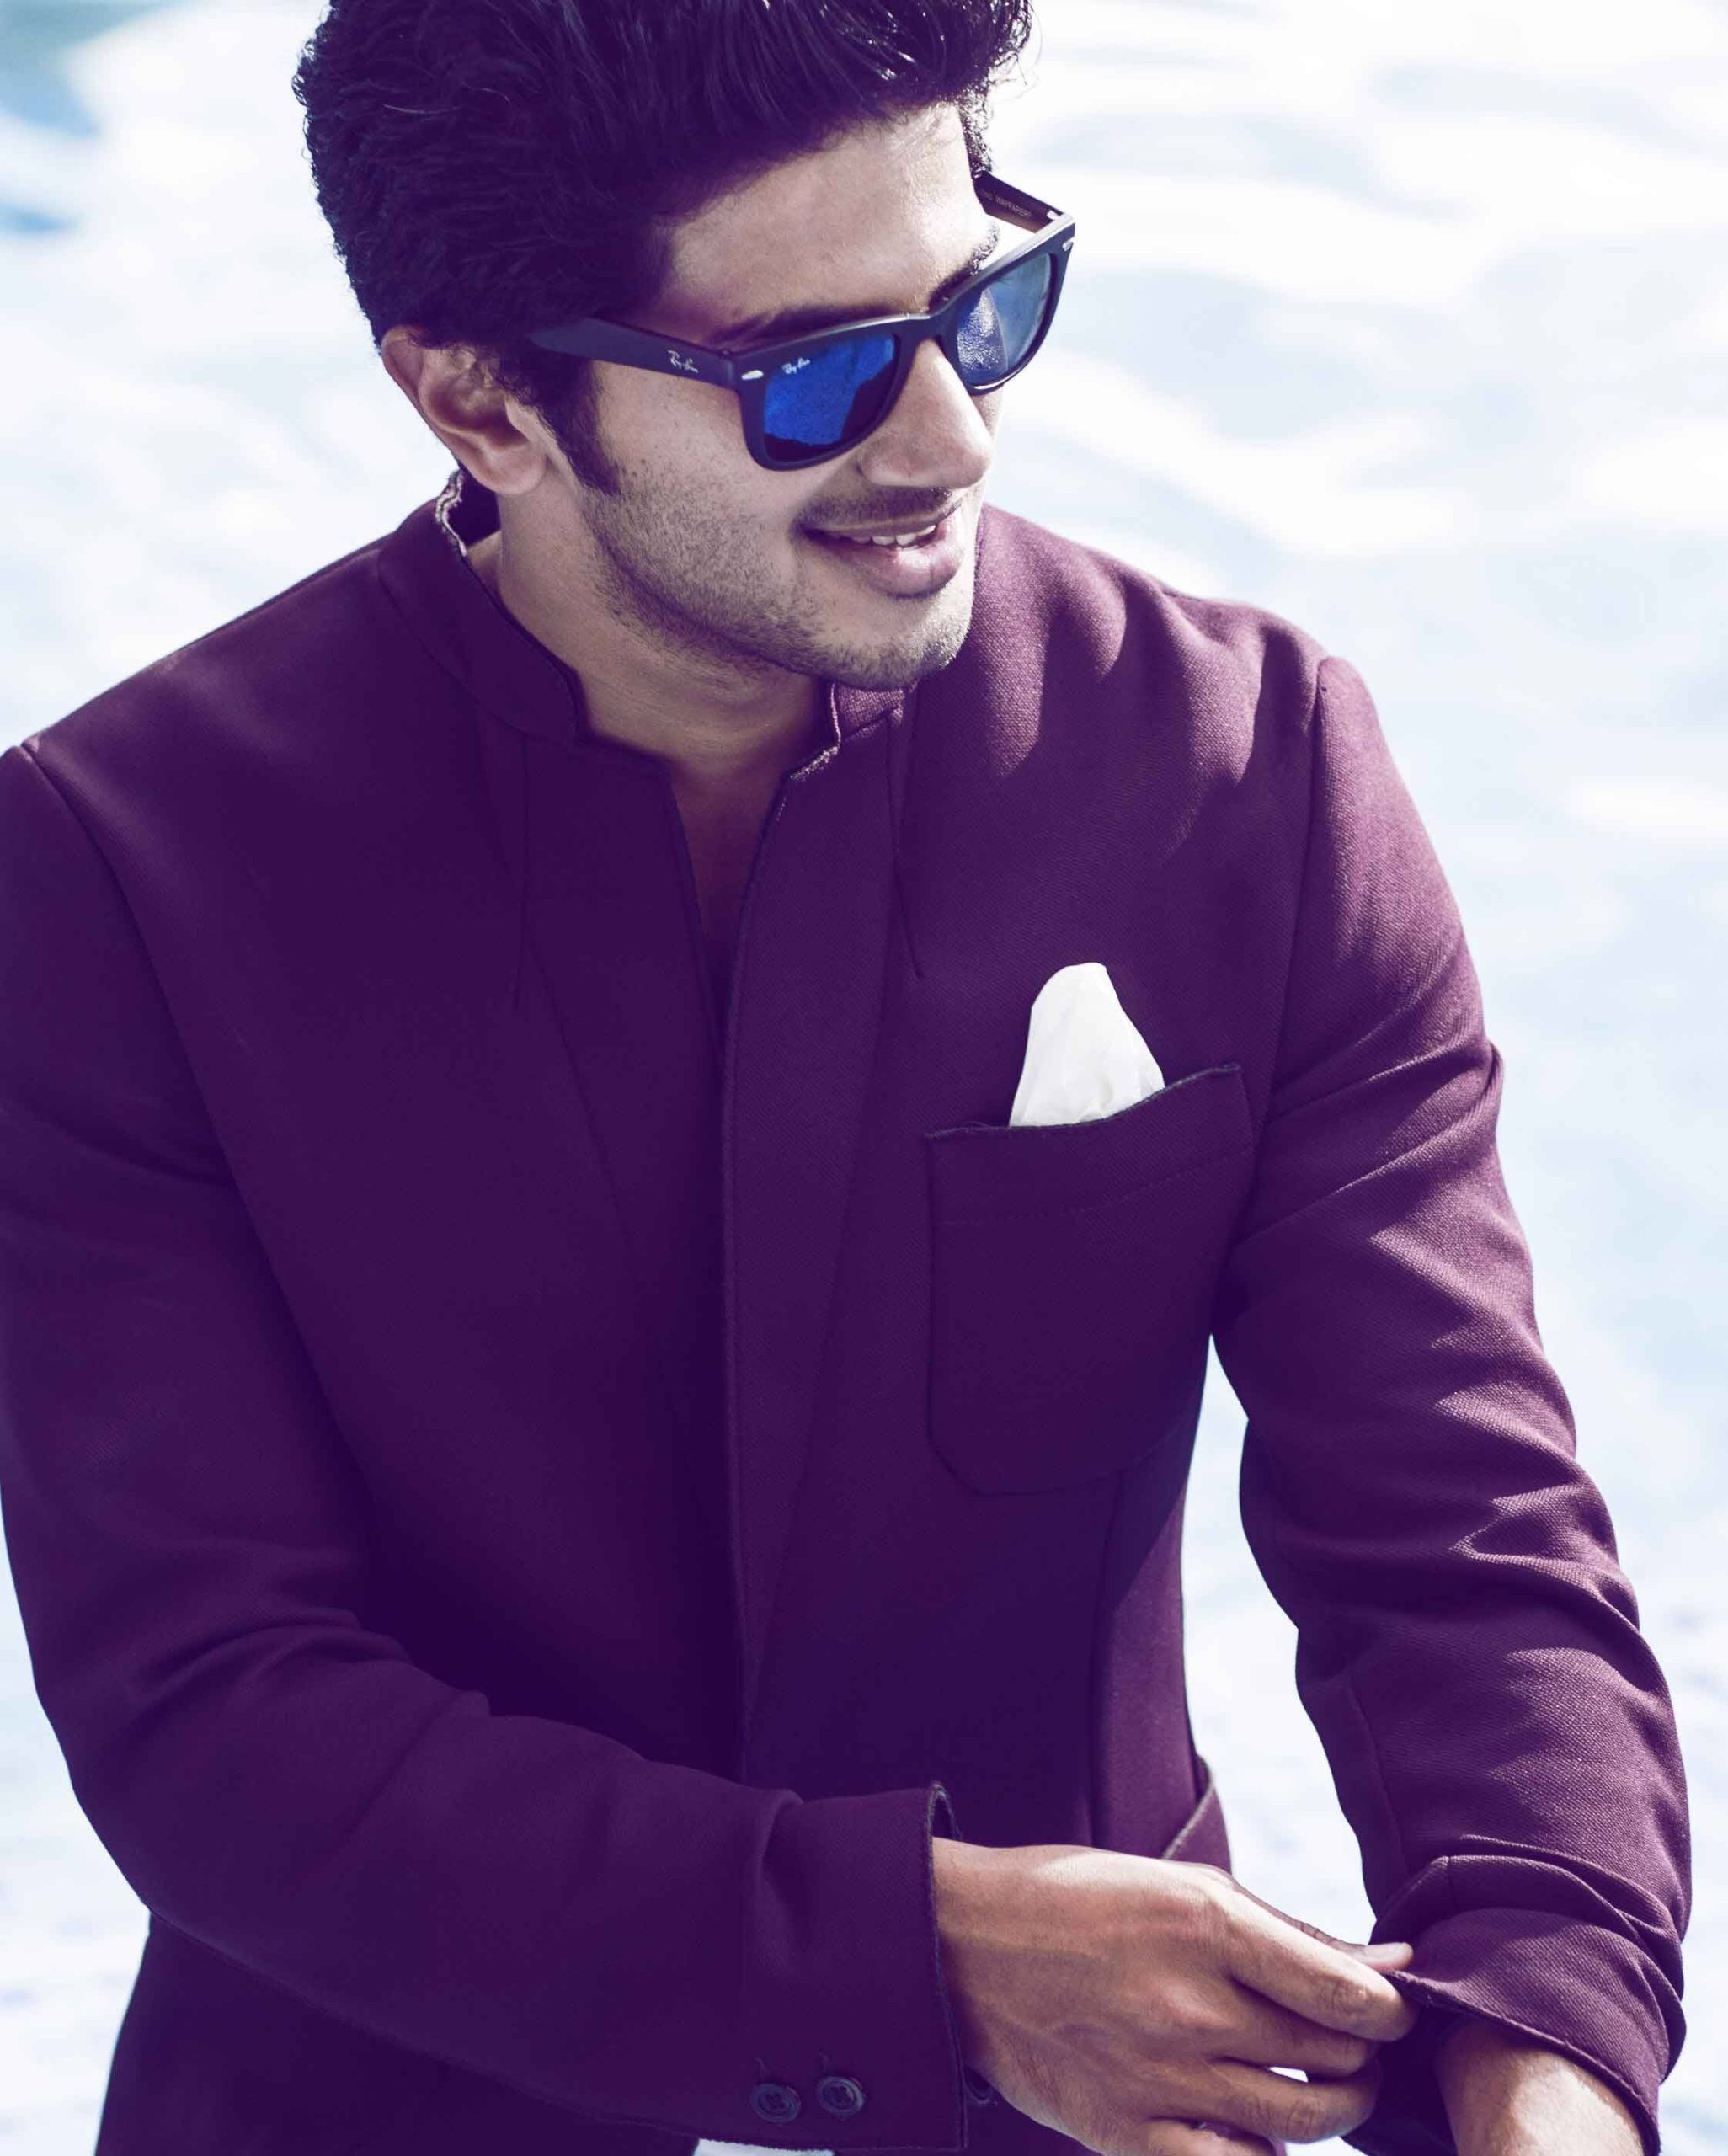 Dulquer salman Hairstyle 62 scaled Dulquer Salmaan hairstyle Charlie | Dulquer Salmaan hairstyle name | Dulquer Salmaan hairstyle photos Dulquer Salman Hairstyles